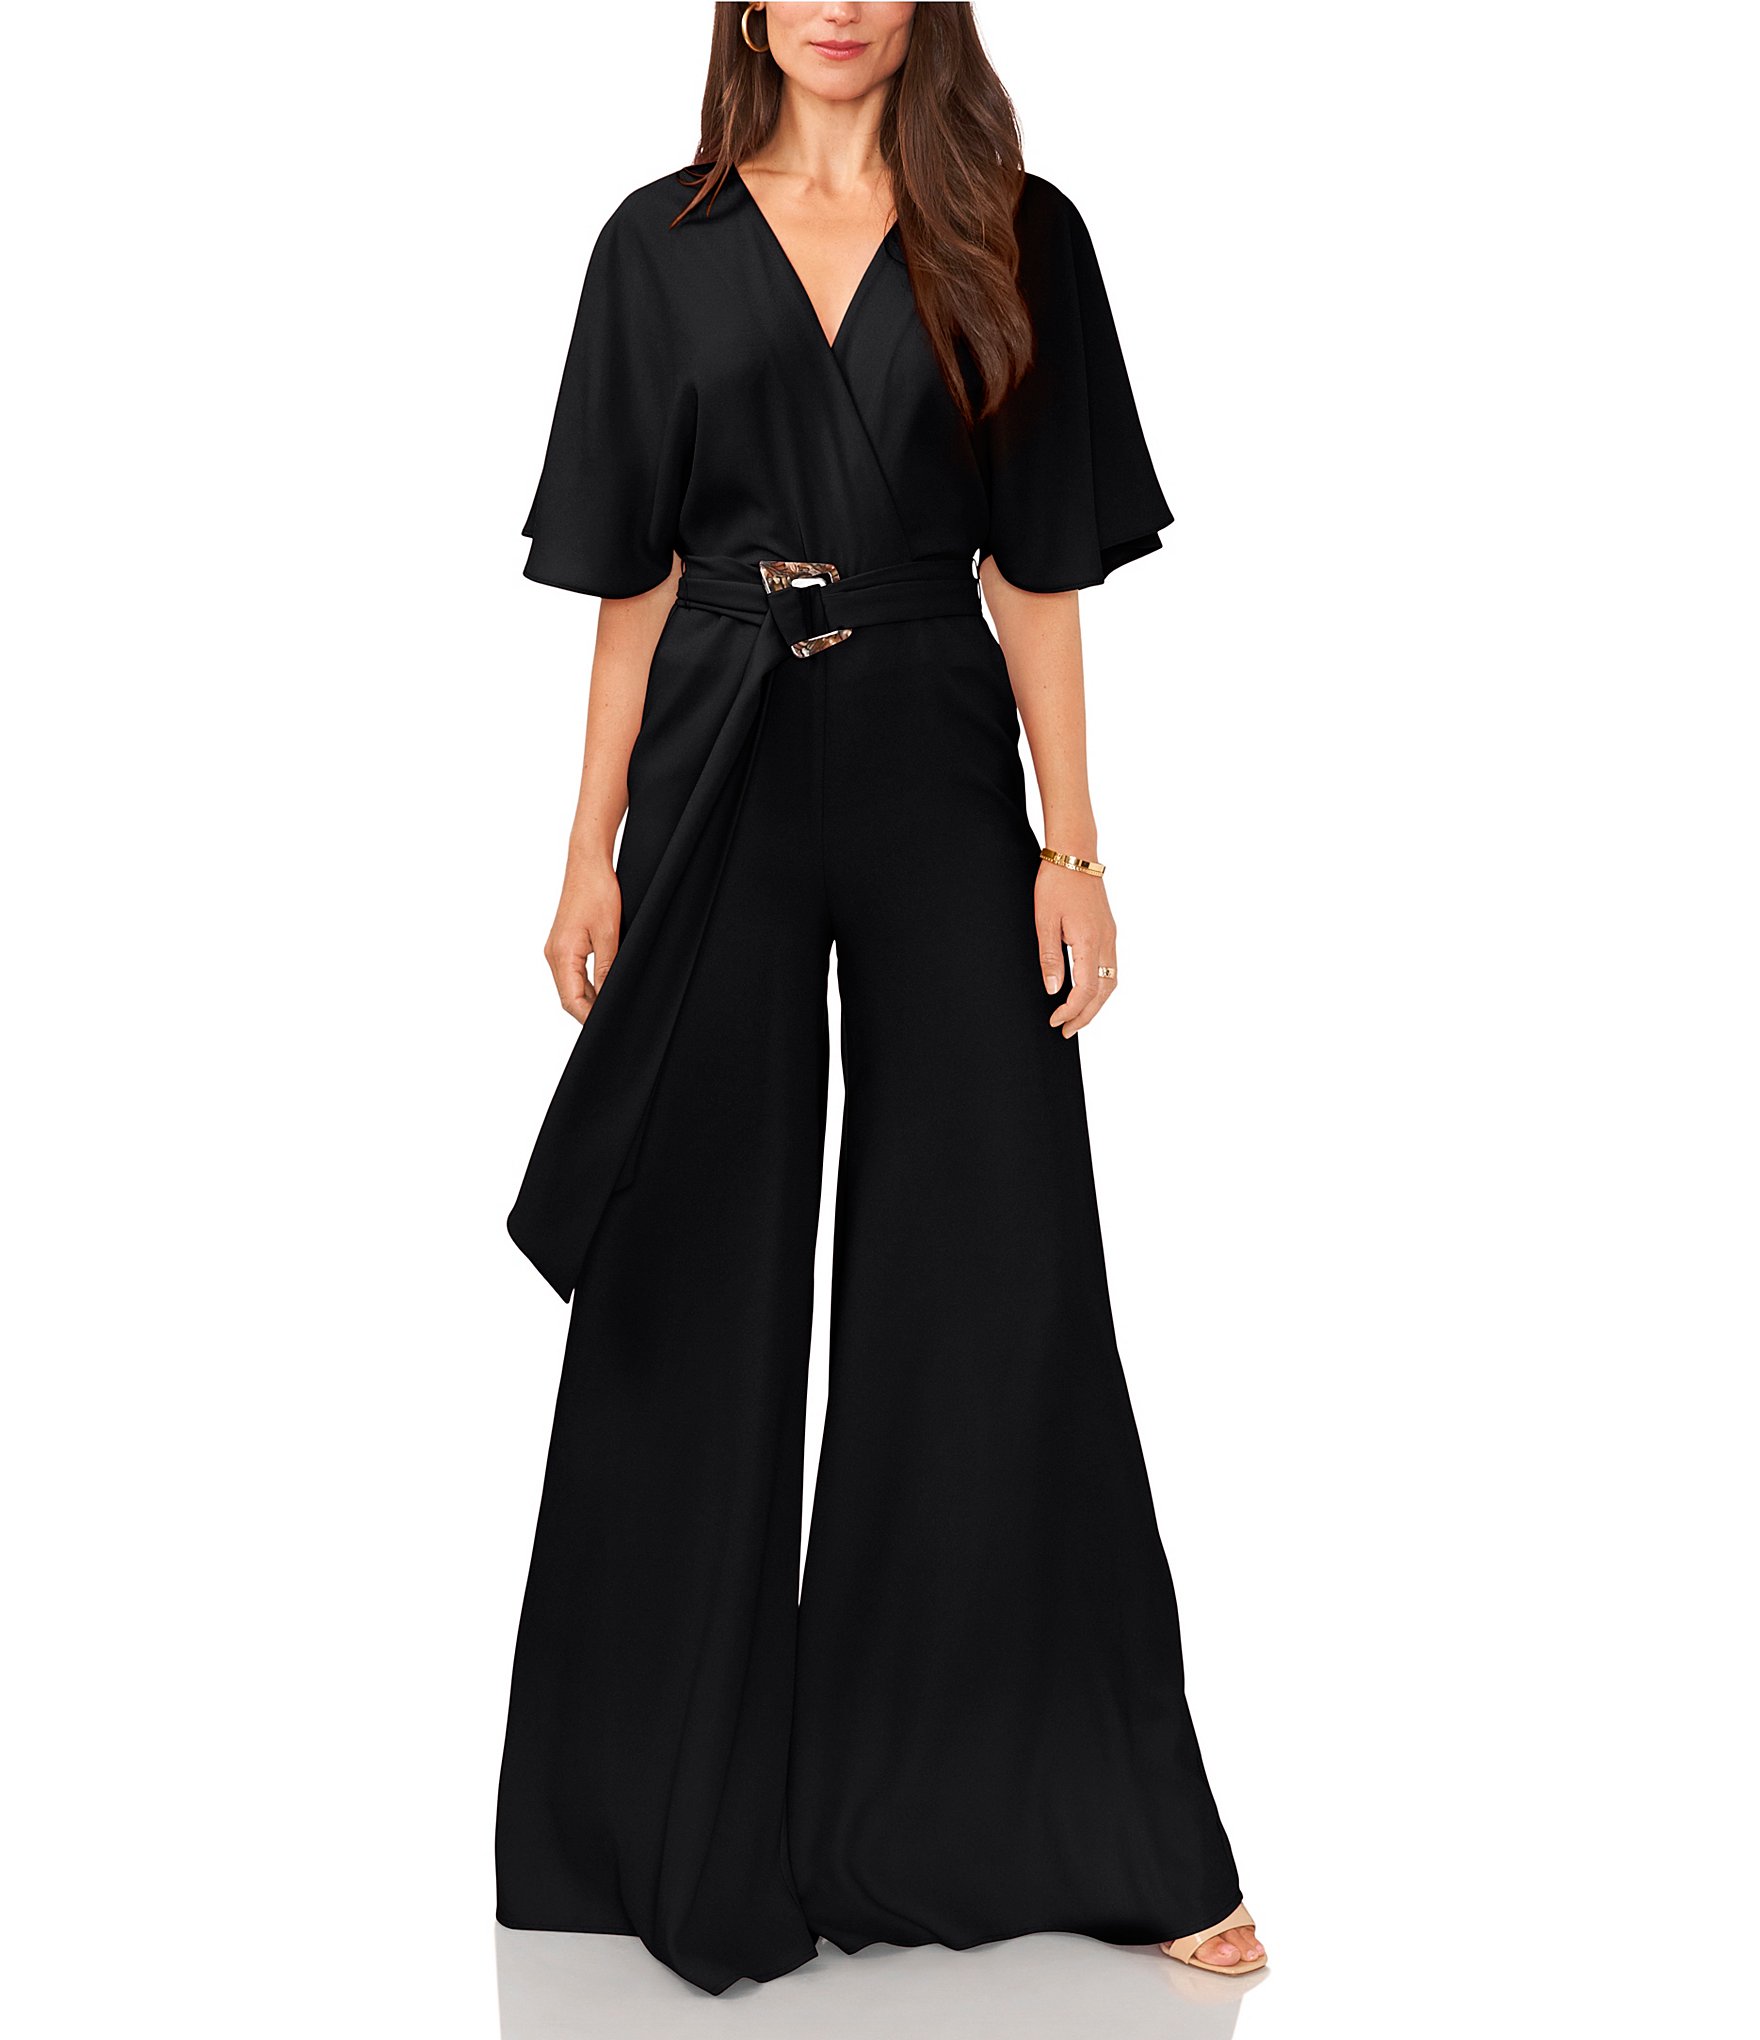 Vince Camuto Women's Jumpsuits & Rompers | Dillard's